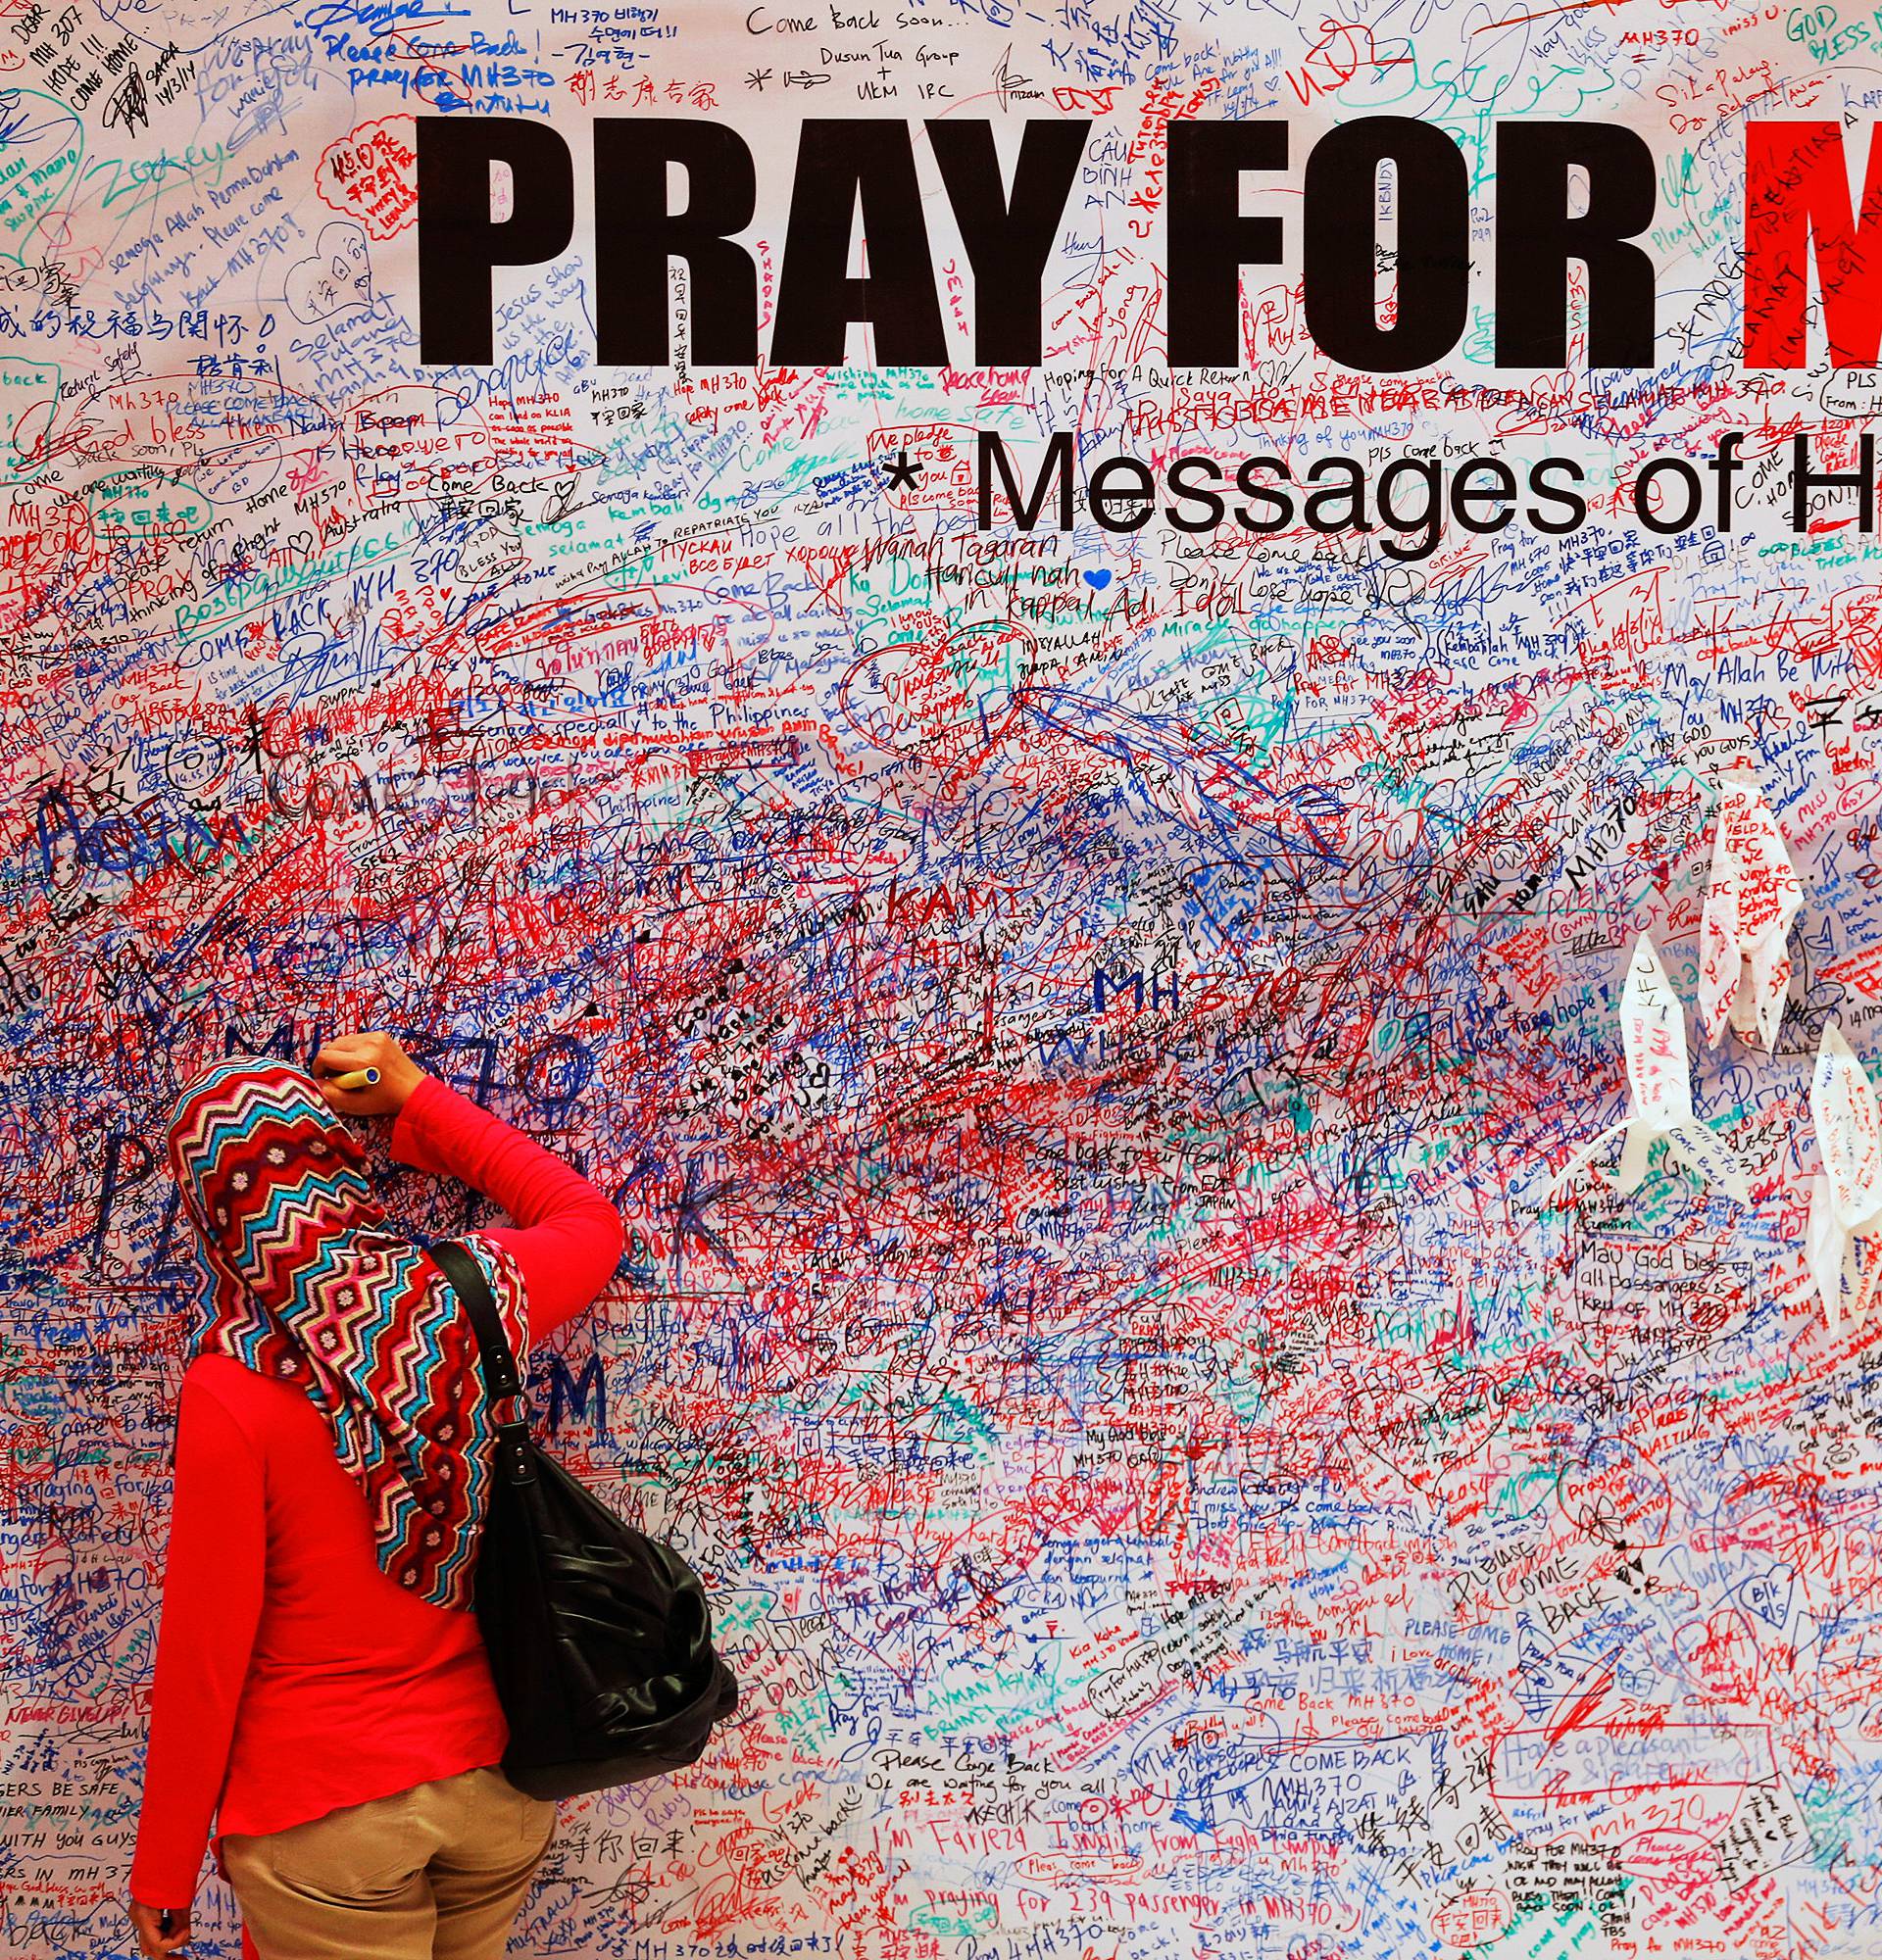 A woman leaves message of support and hope for passengers of missing Malaysia Airlines MH370 in central Kuala Lumpur